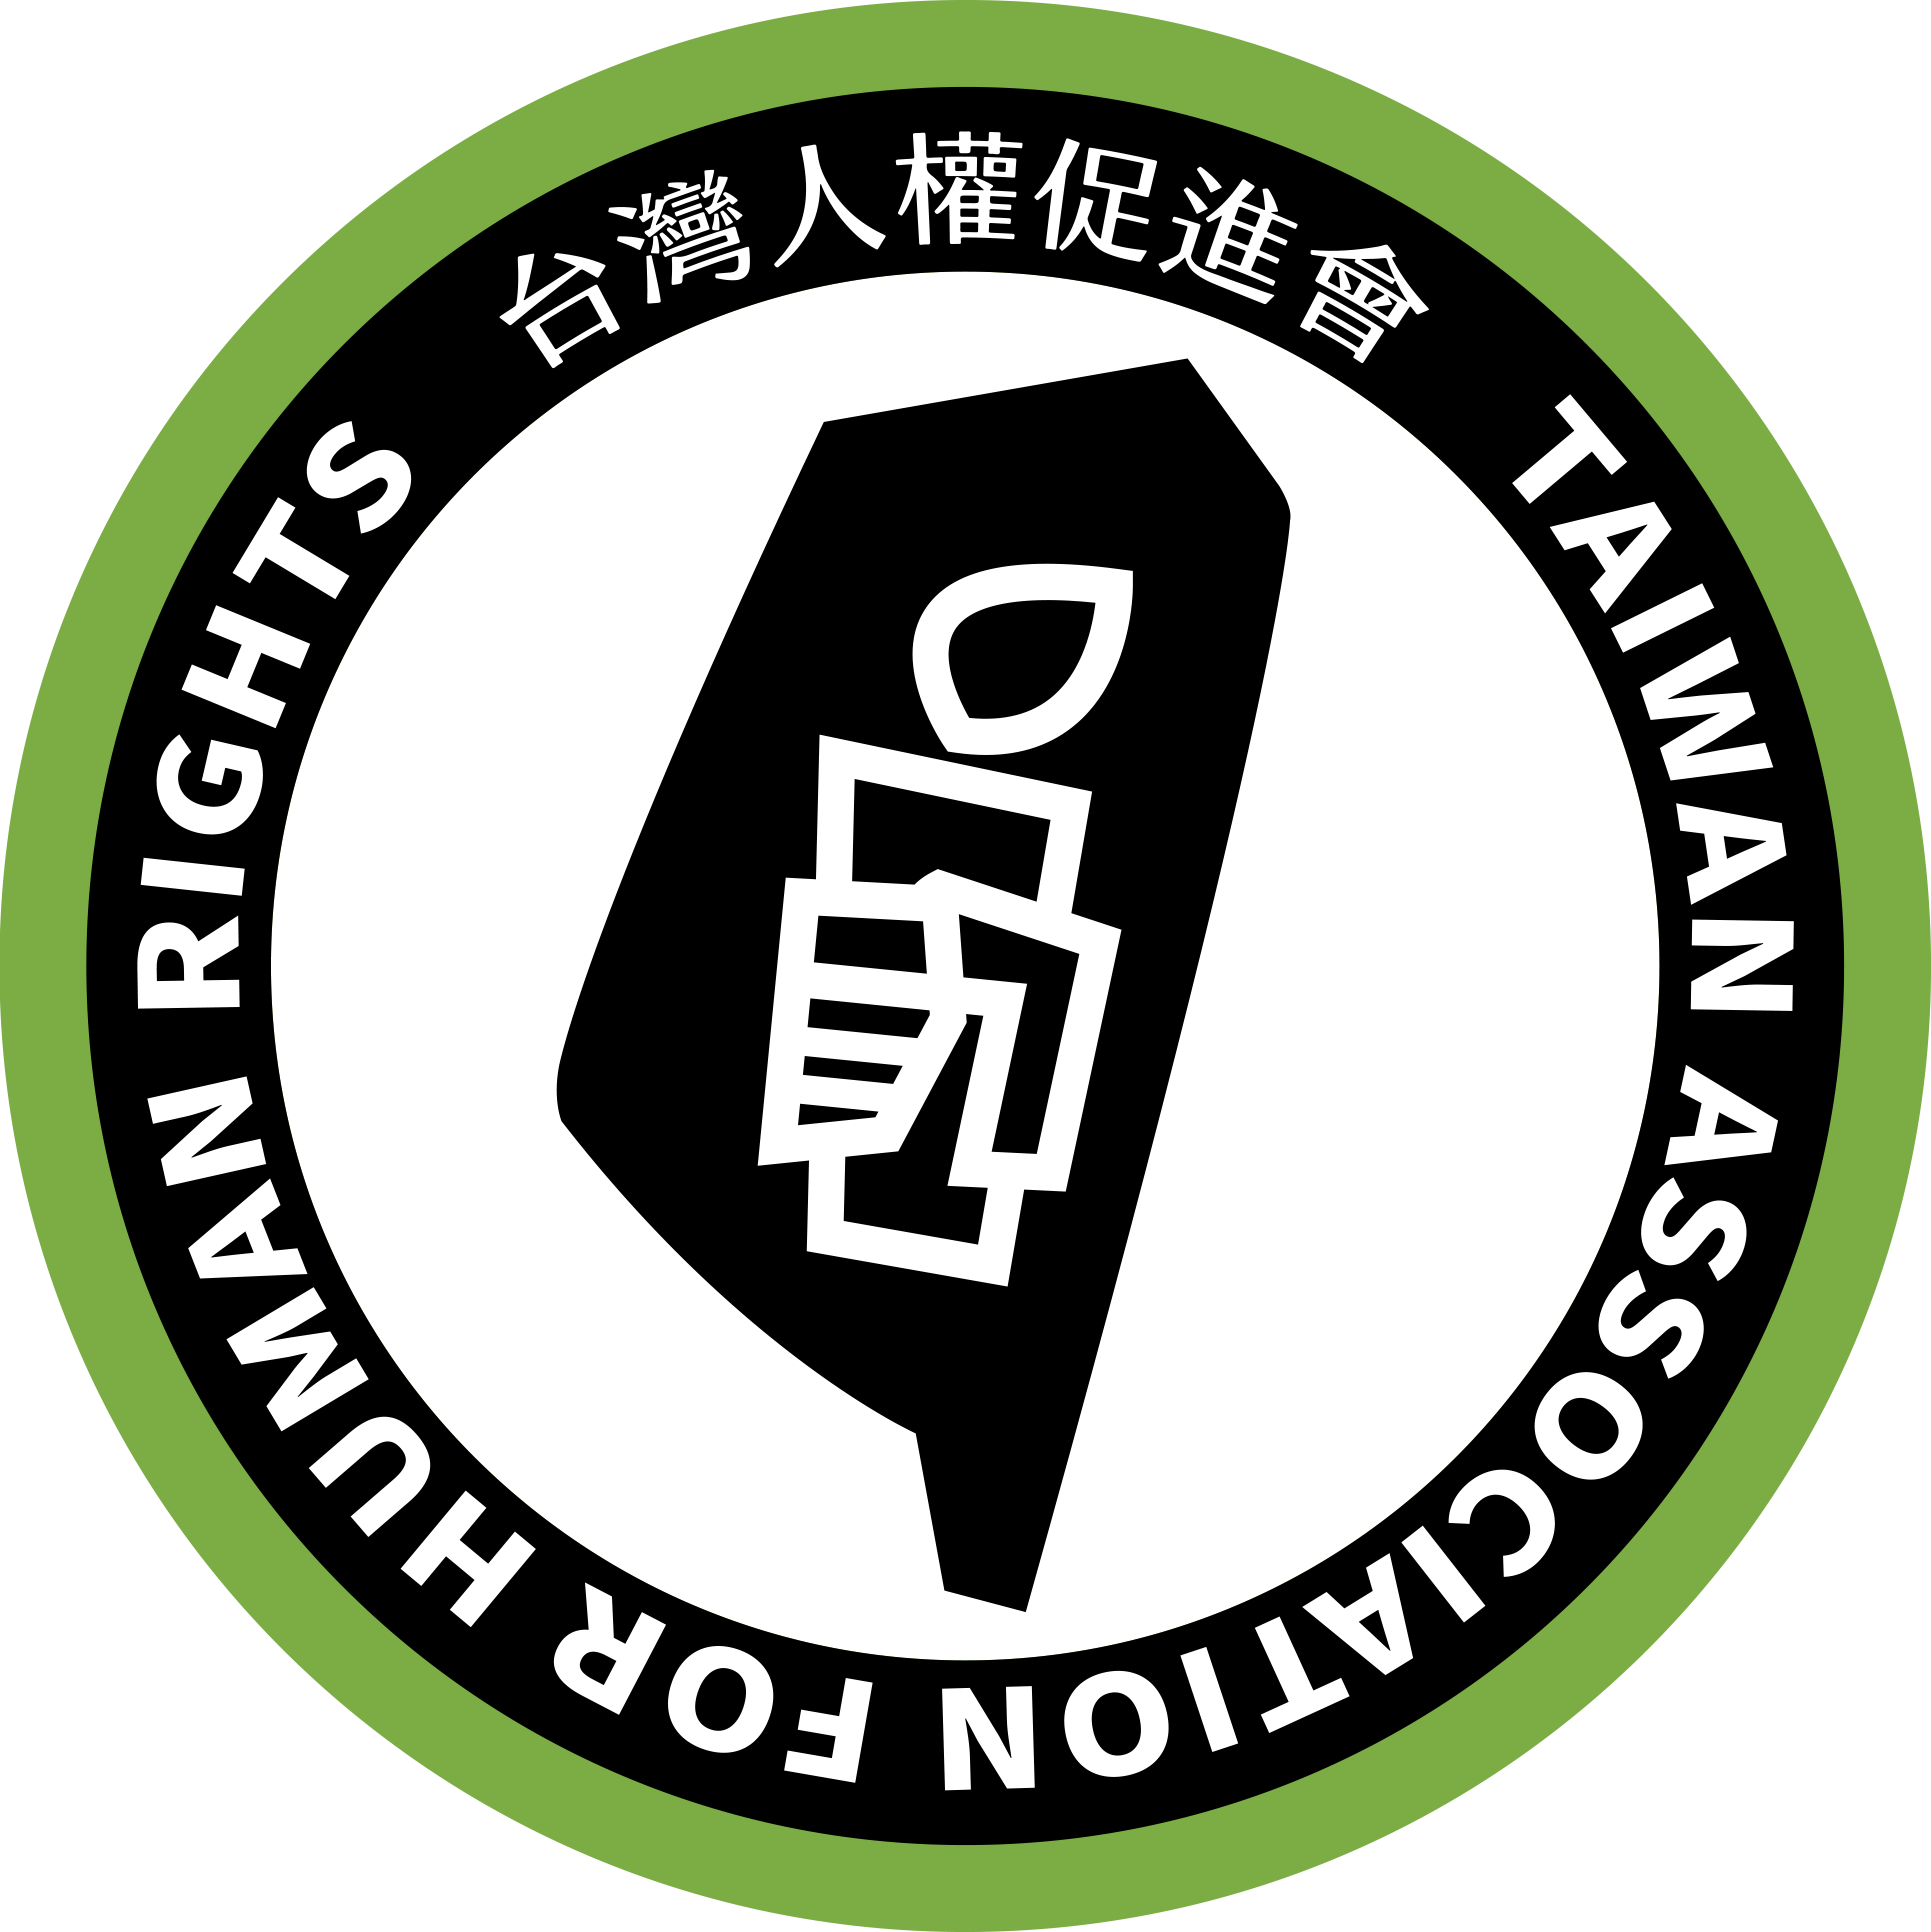 Taiwan Association for Human Rights